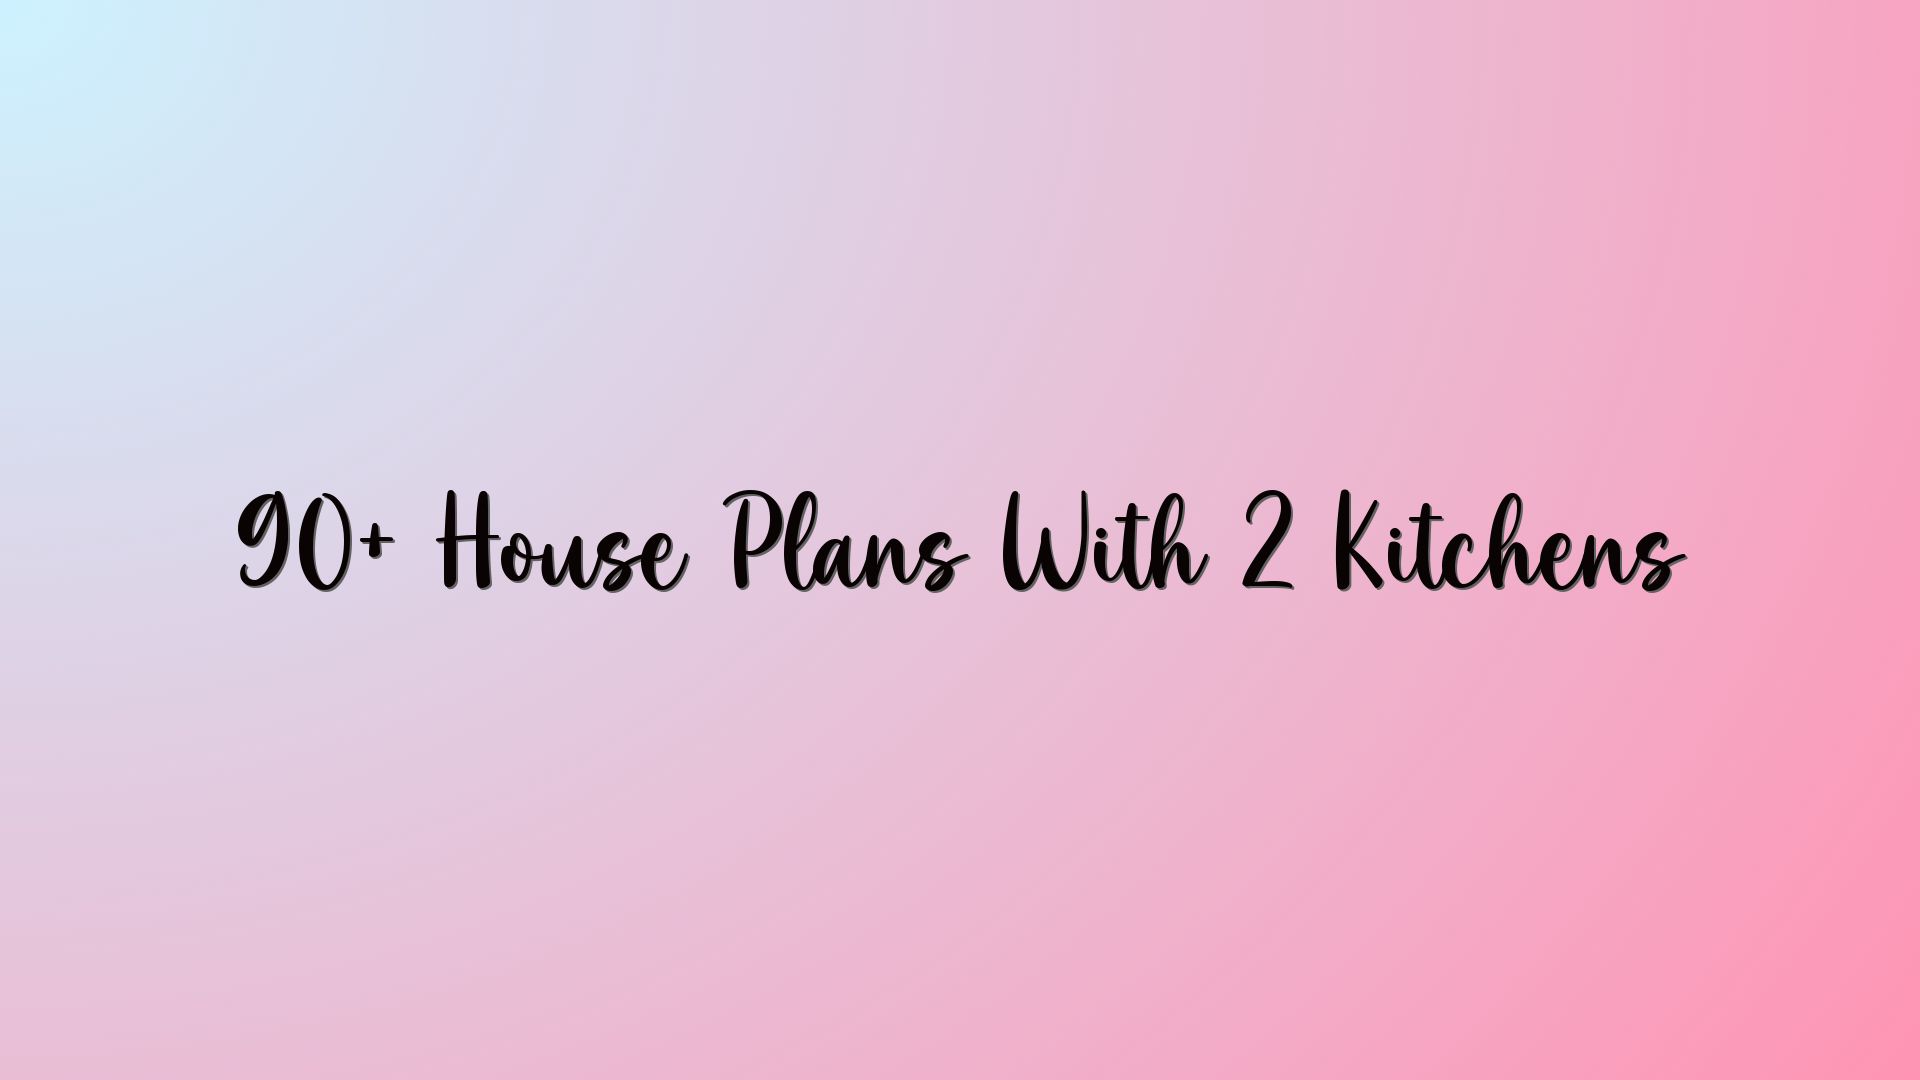 90+ House Plans With 2 Kitchens